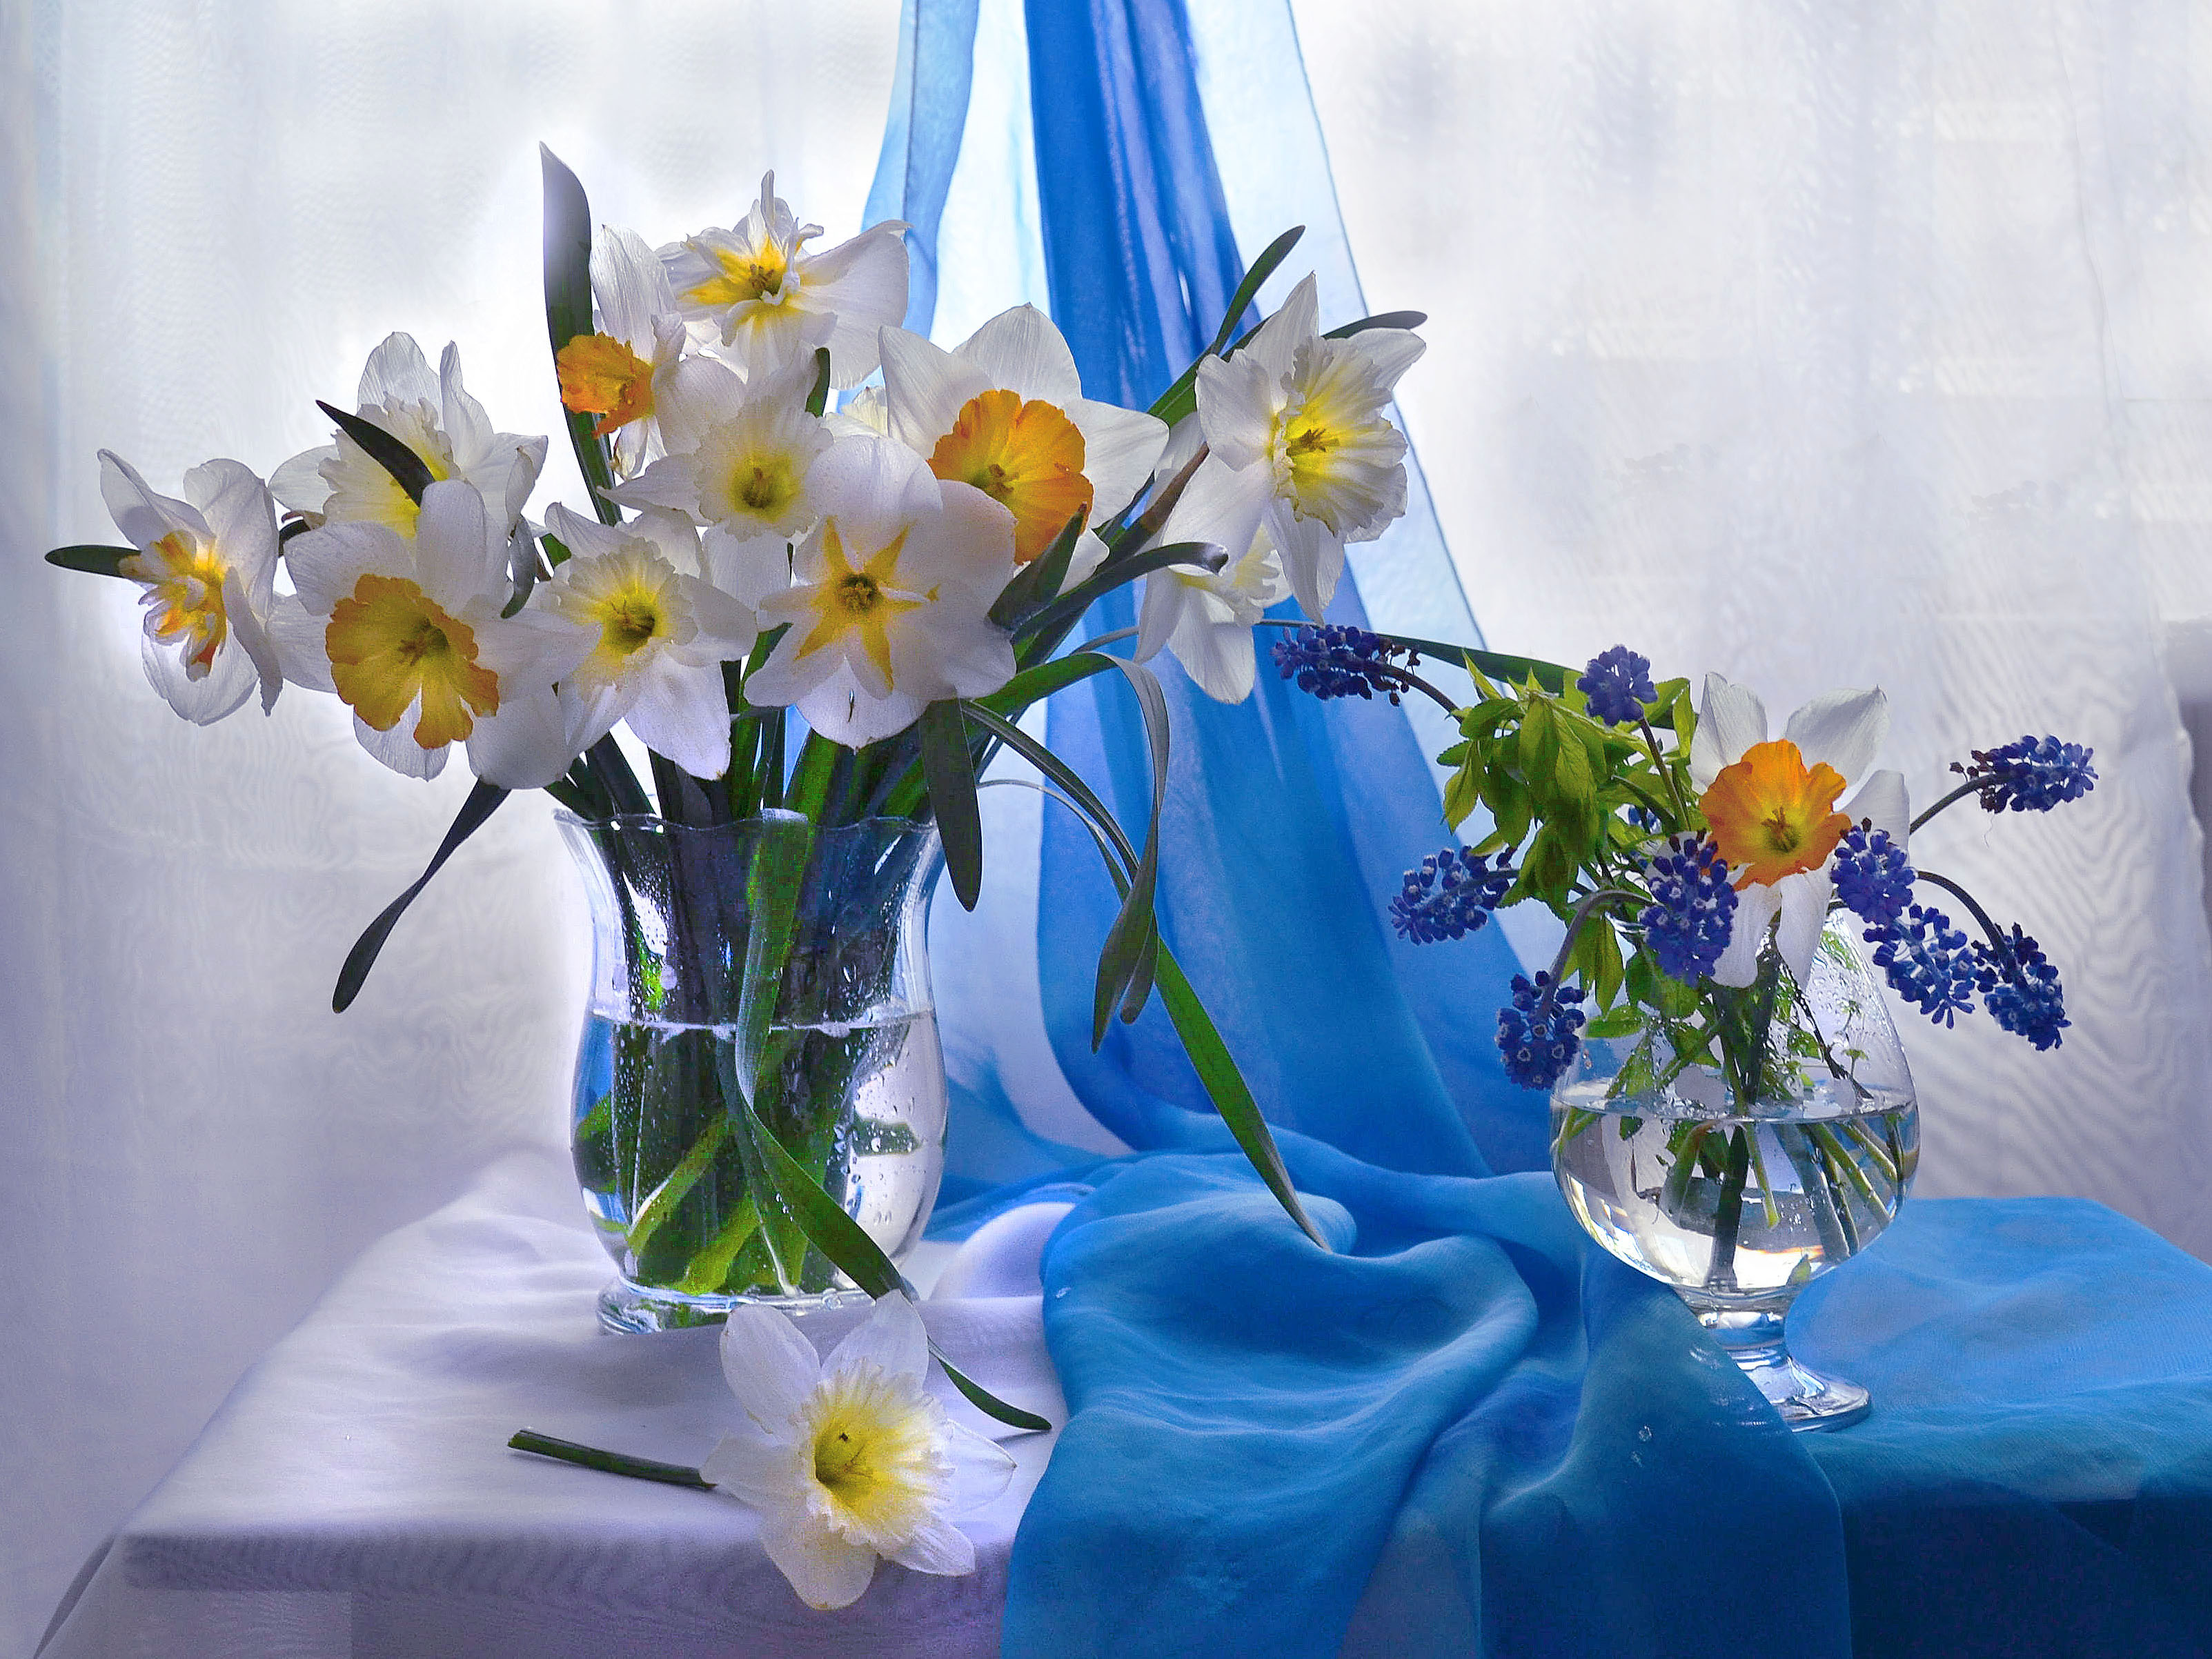 Wallpapers bouquet daffodils background on the desktop